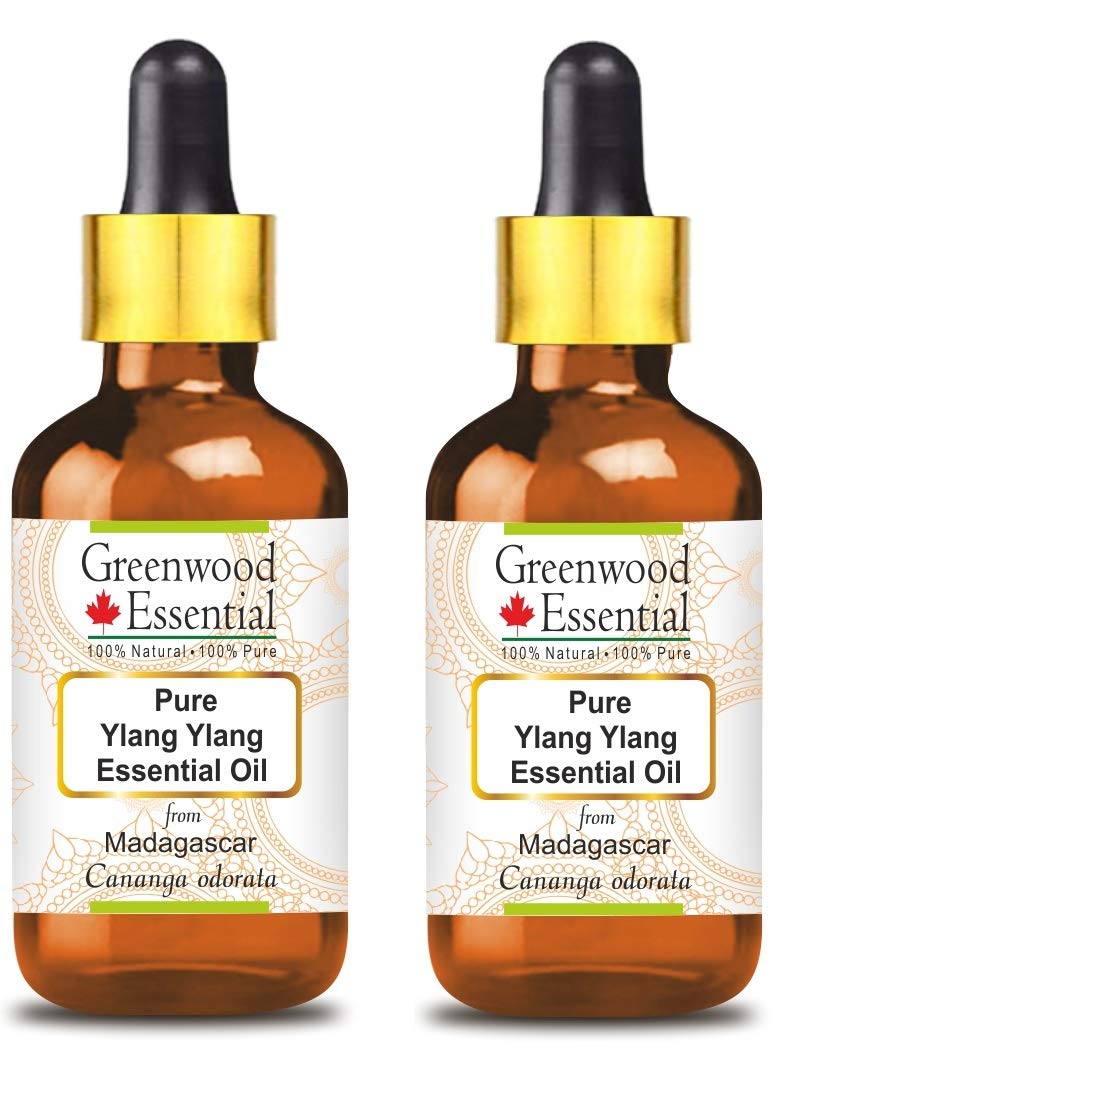 Greenwood Essential Pure Ylang Ylang Essential Oil (Cananga odorata) with Glass Dropper Steam Distilled (Pack of Two) 100ml X 2 (6.76 oz)